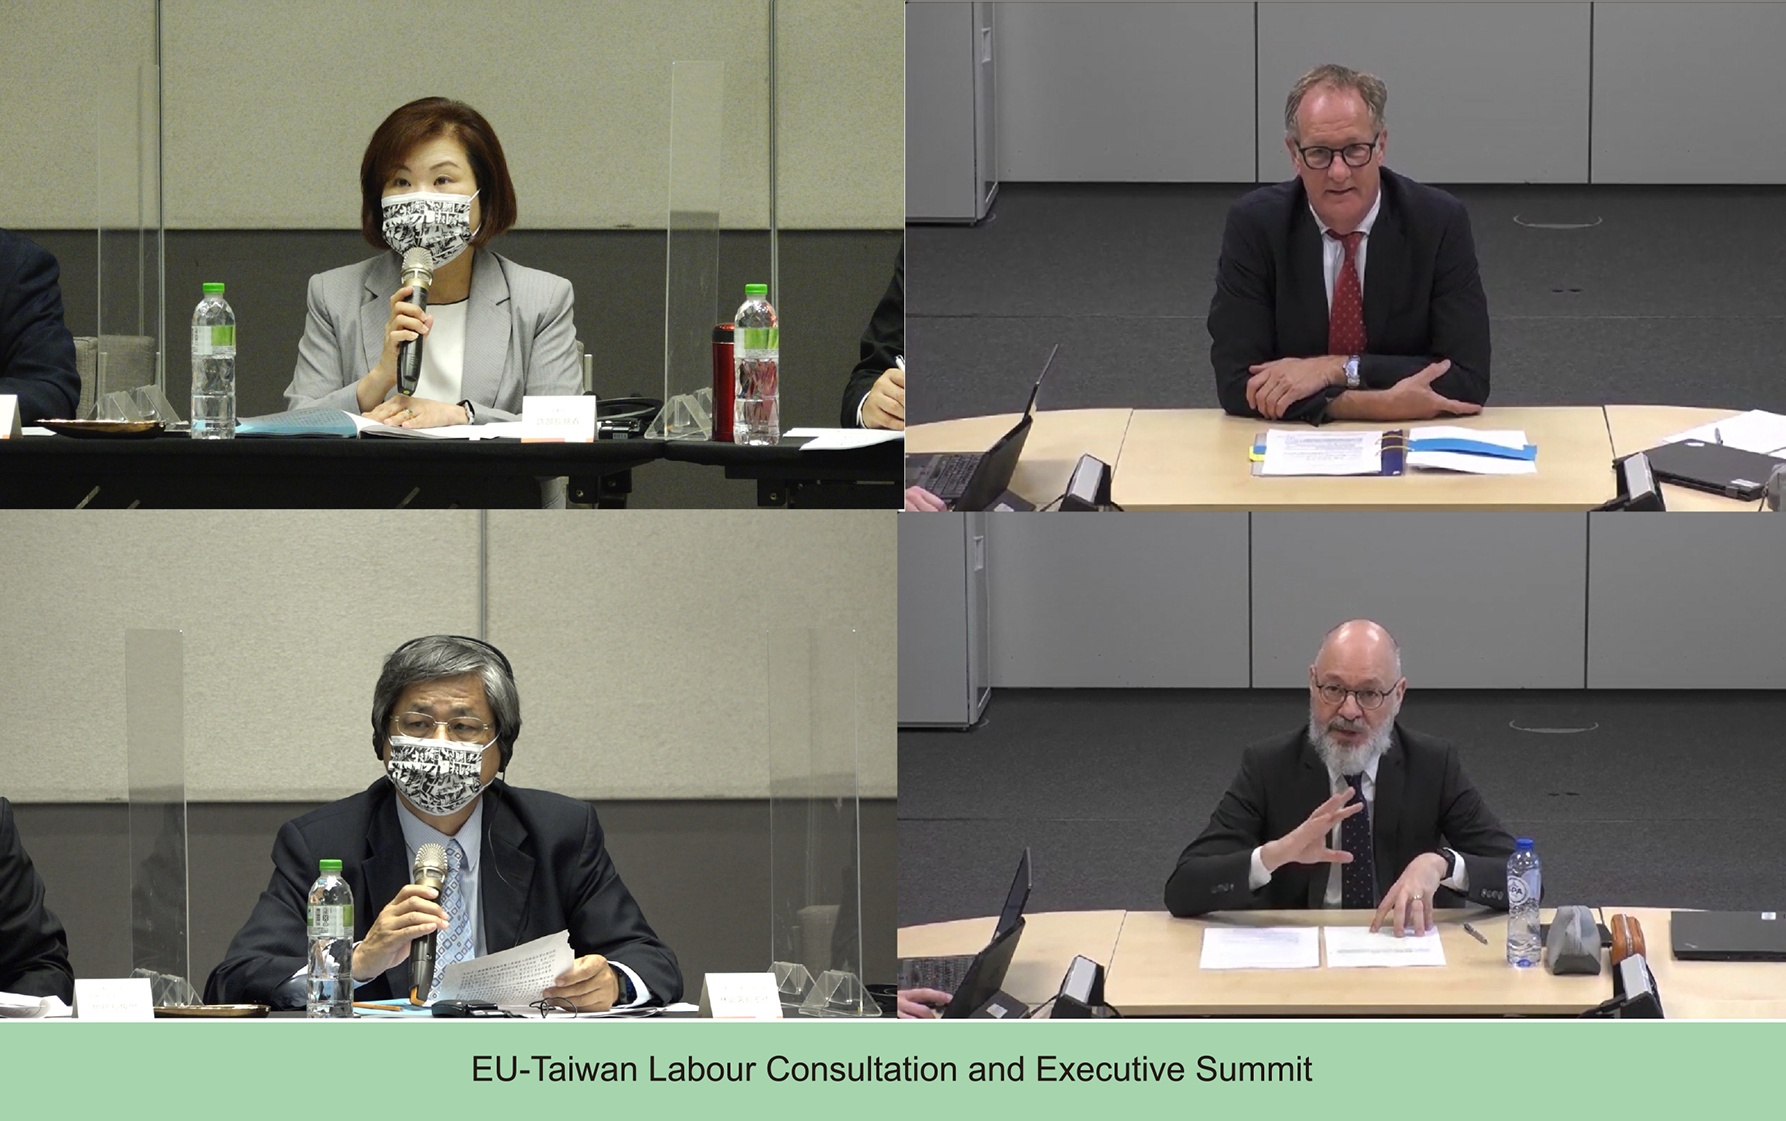 4th Taiwan-EU Labour Consultation Focusing On Issues On Developing Talent in Digital Transition and Green Jobs and Reinforcing EU-Taiwan Discussions On Labor Issues